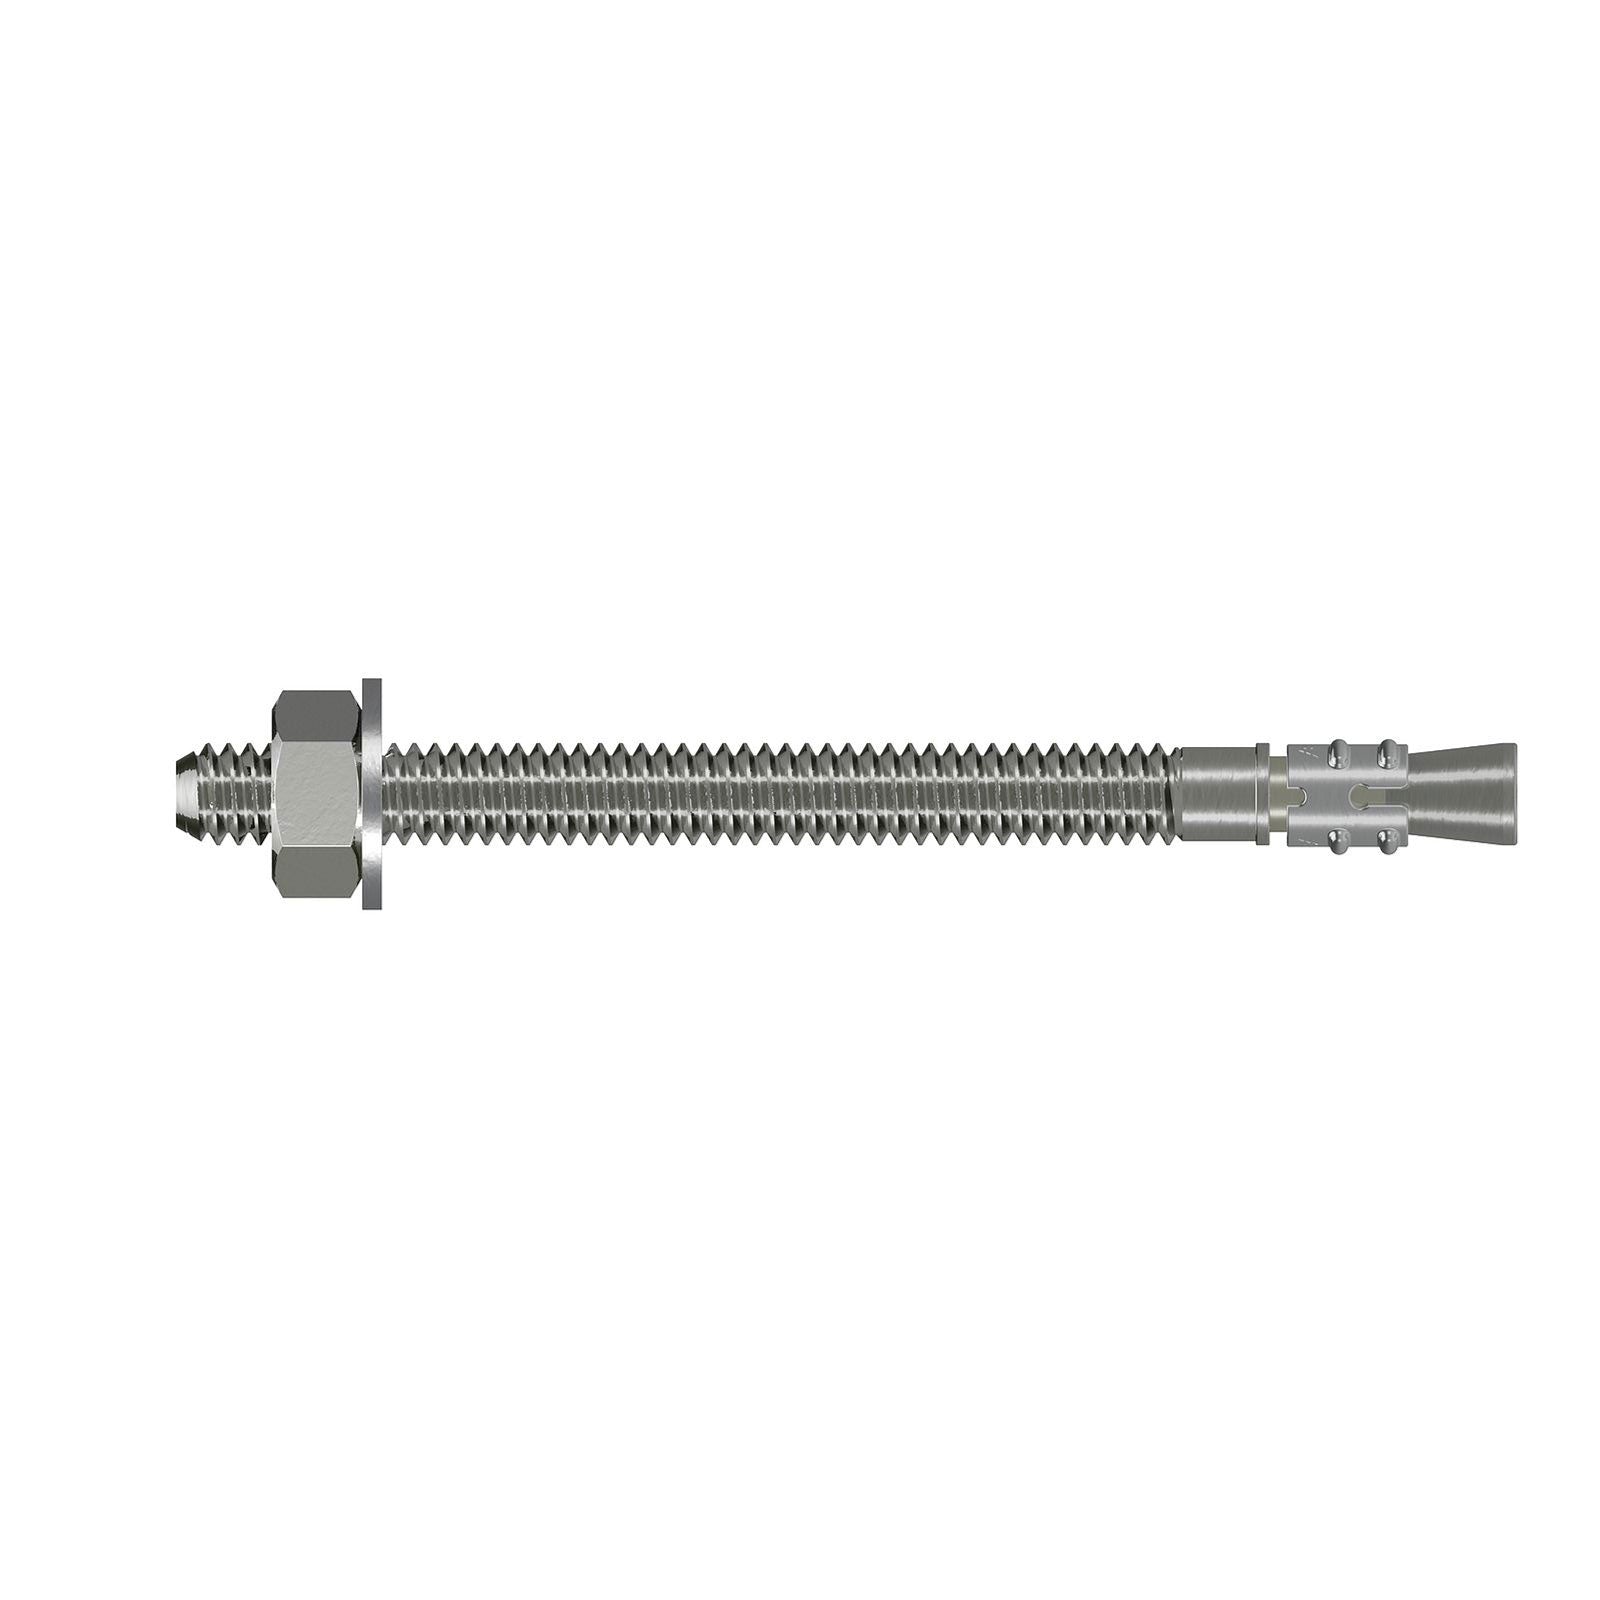 1/4" x 3-1/4" Simpson Strong Bolt 2 Wedge Anchor, Stainless Steel